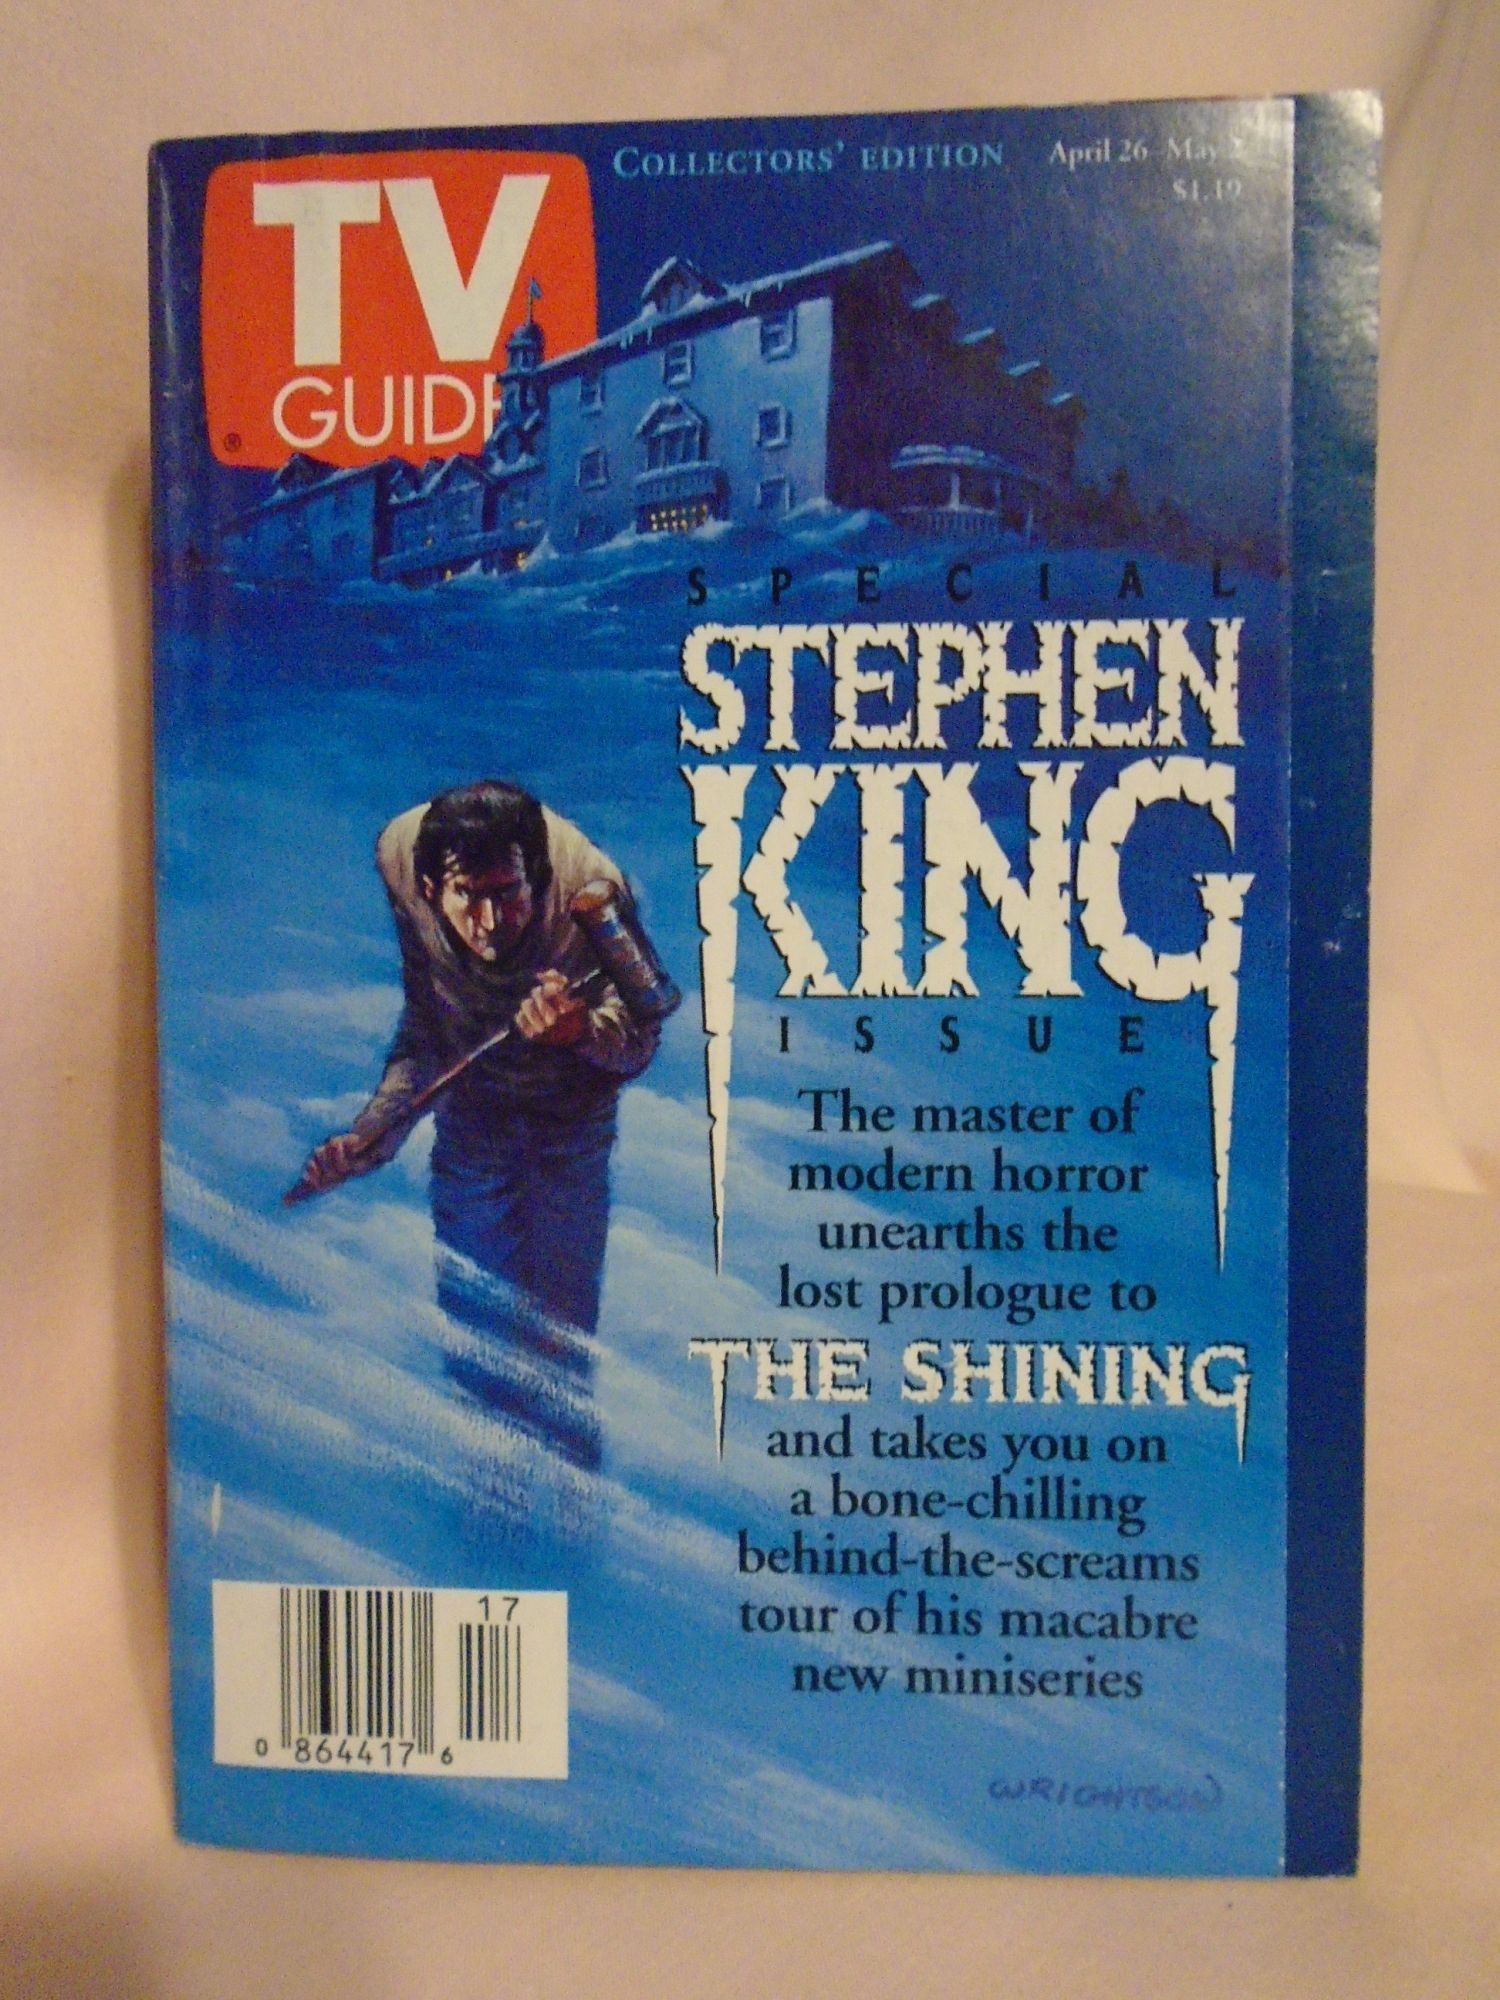 THE SHINING. STEPHEN KING ISSUE, TV GUIDE COLLECTORS' EDITION